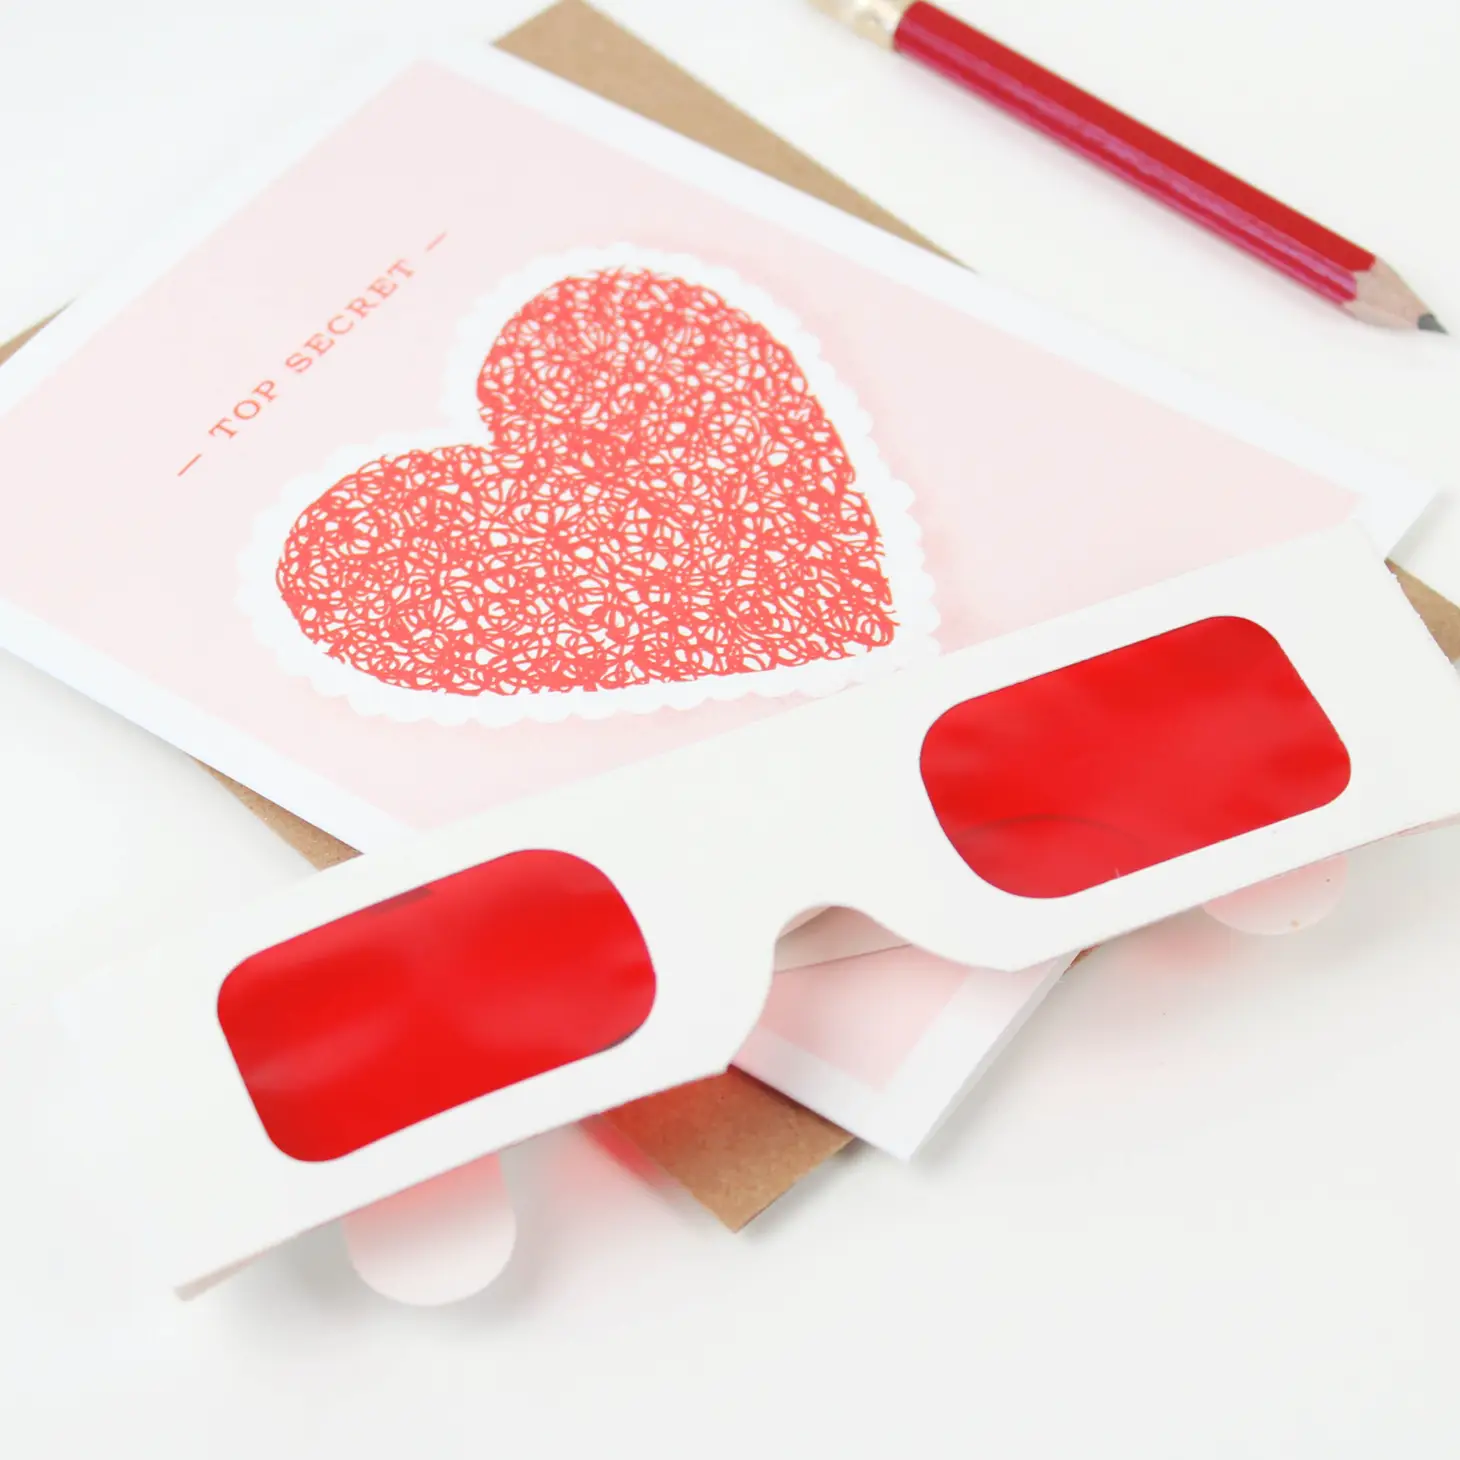 Inkling Paperie - Heart Decoder Card